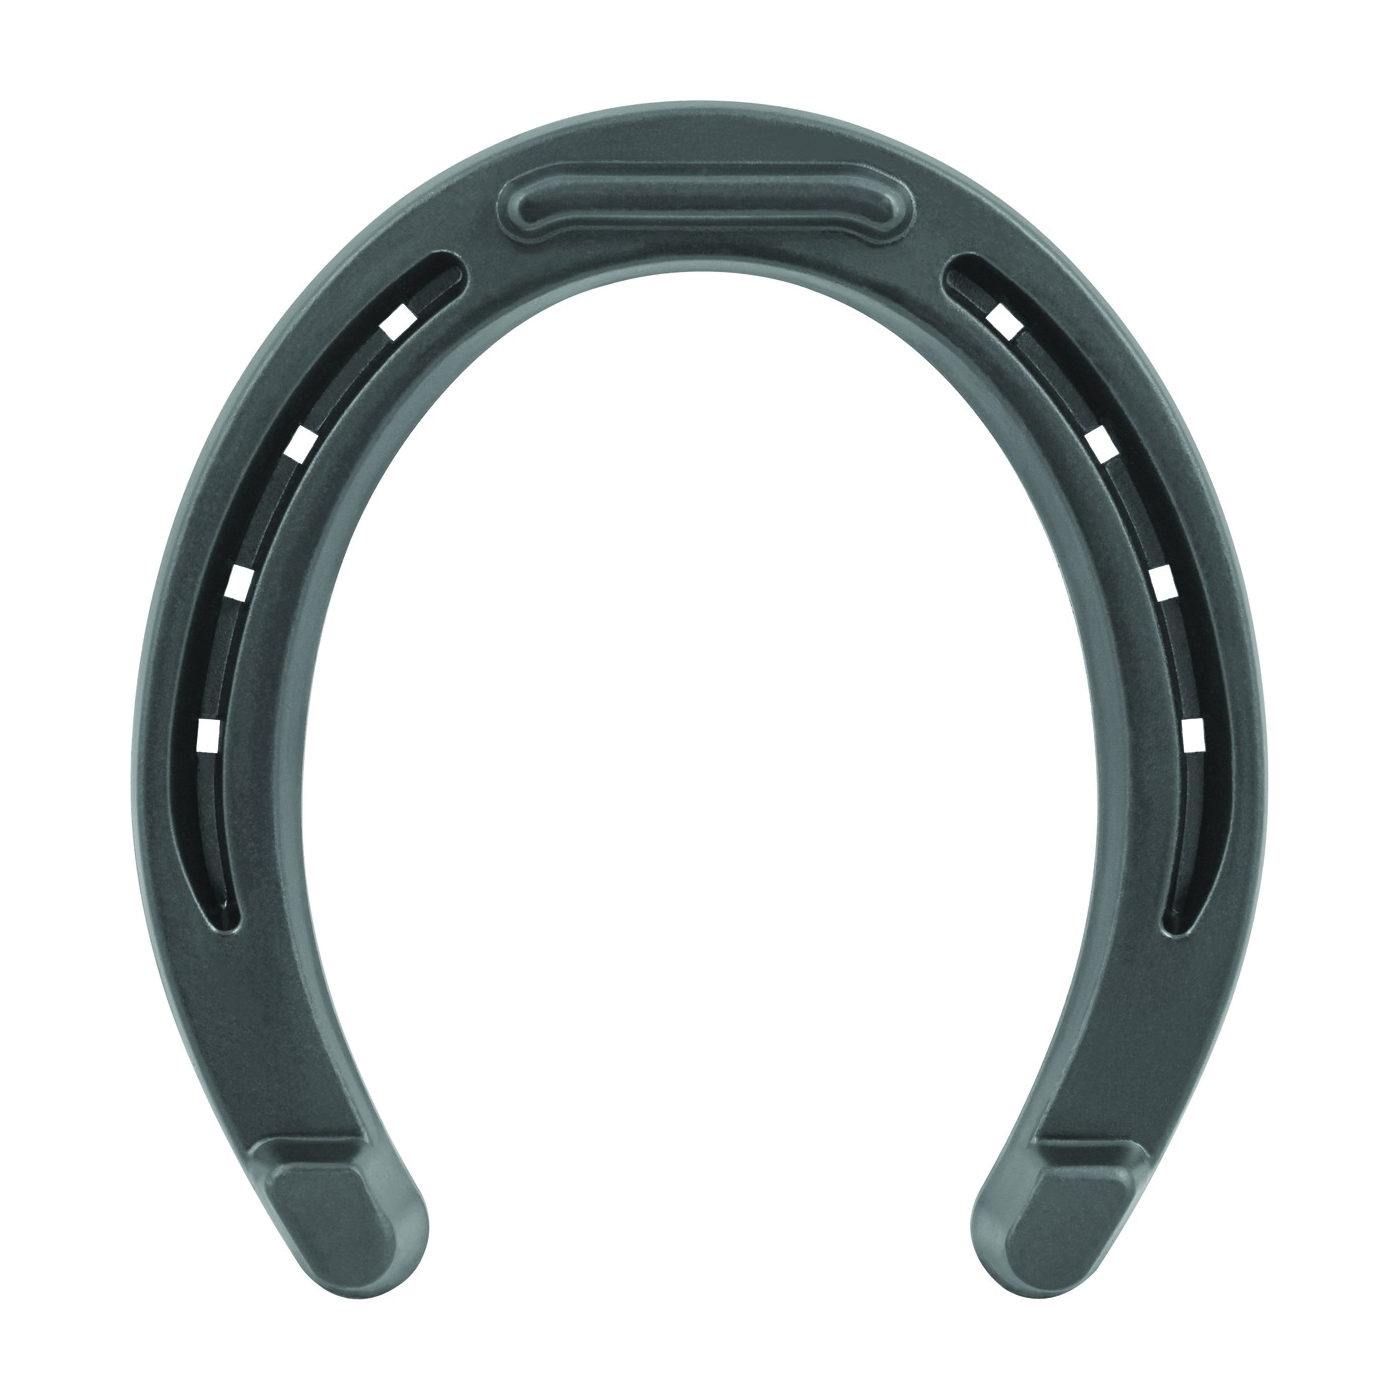 Farrier 0THB Horseshoe, 5/16 in Thick, #0, Steel